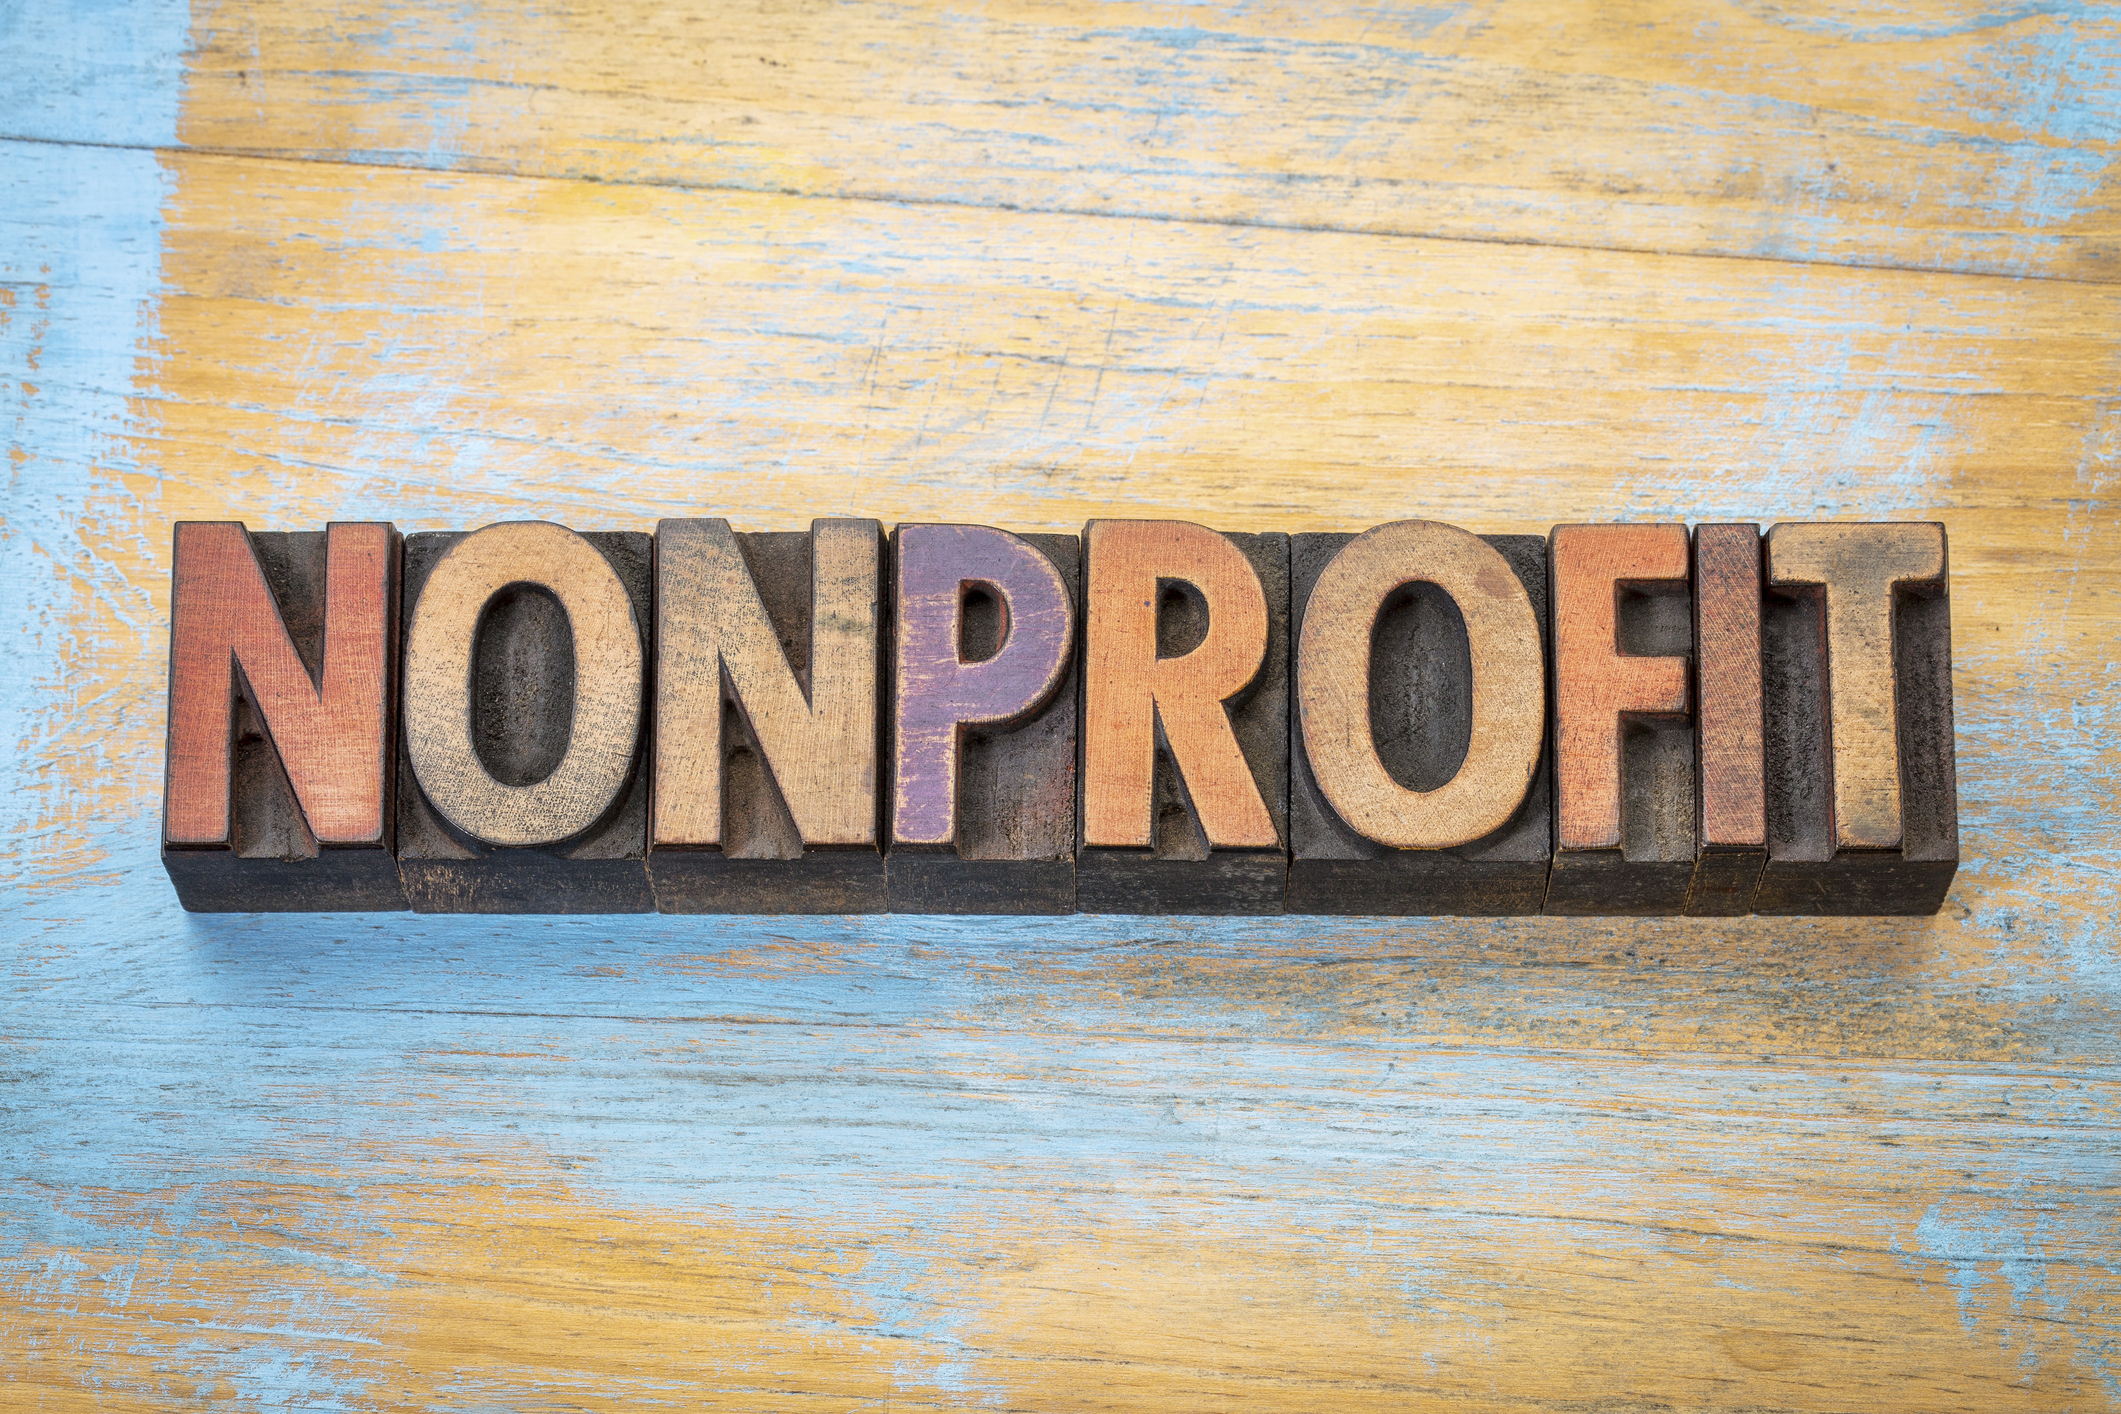 It Is Important To Identify The Right Nonprofit Based Off Your Skillset